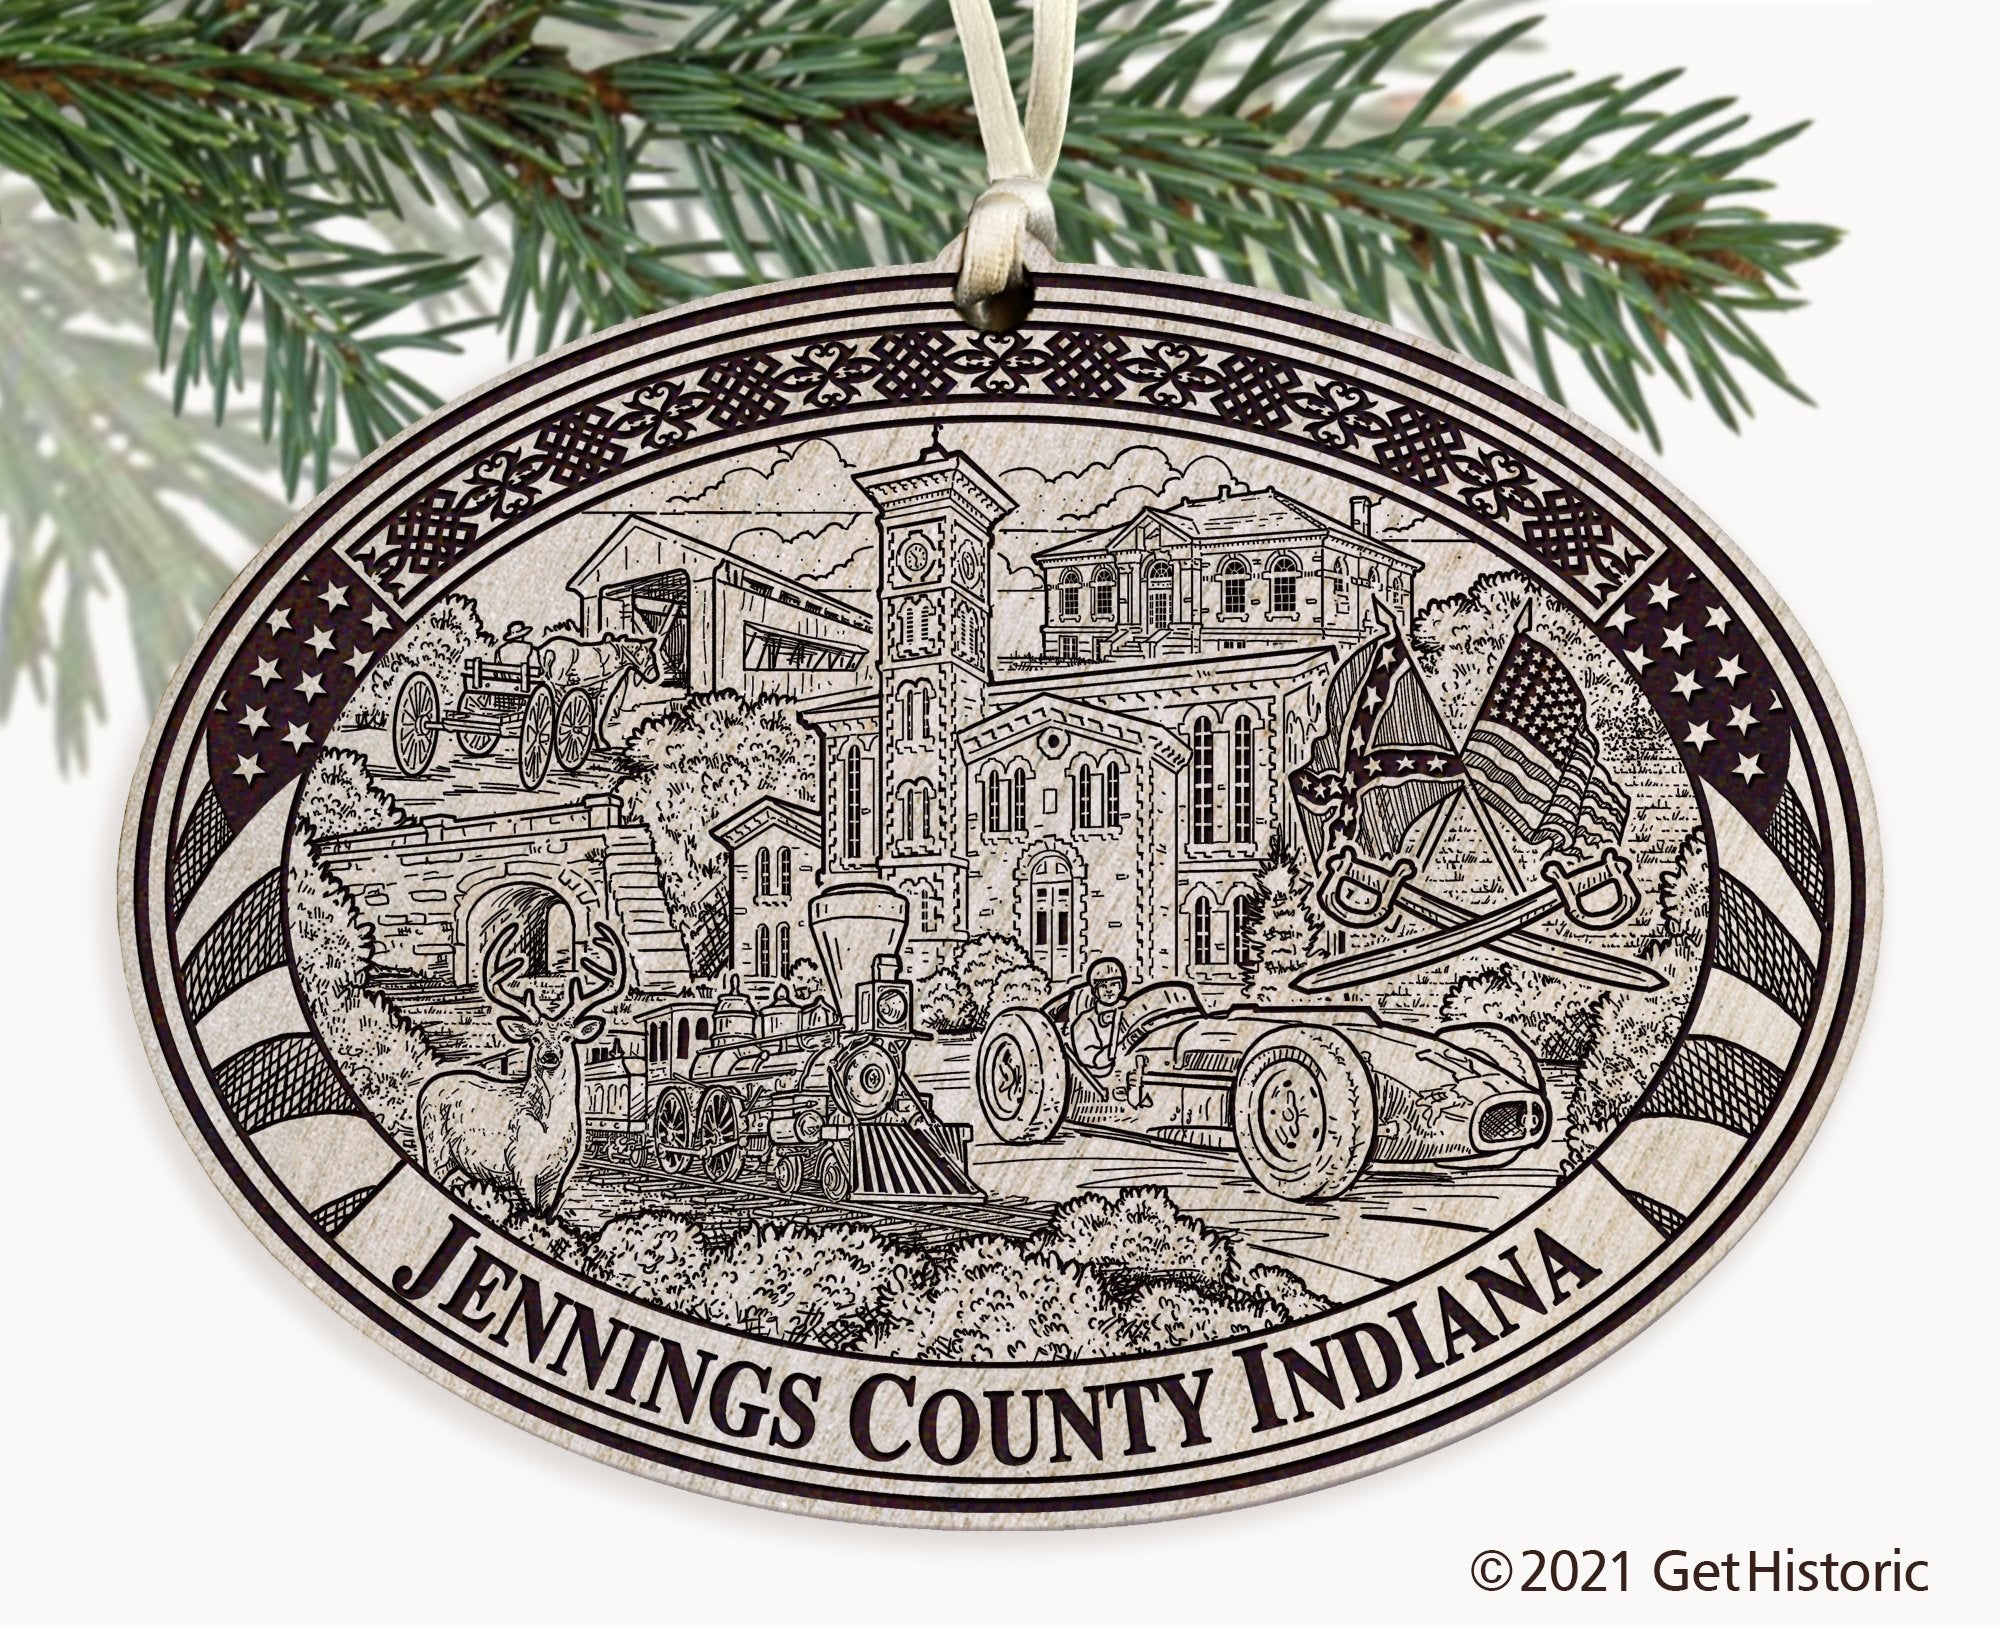 Jennings County Indiana Engraved Ornament